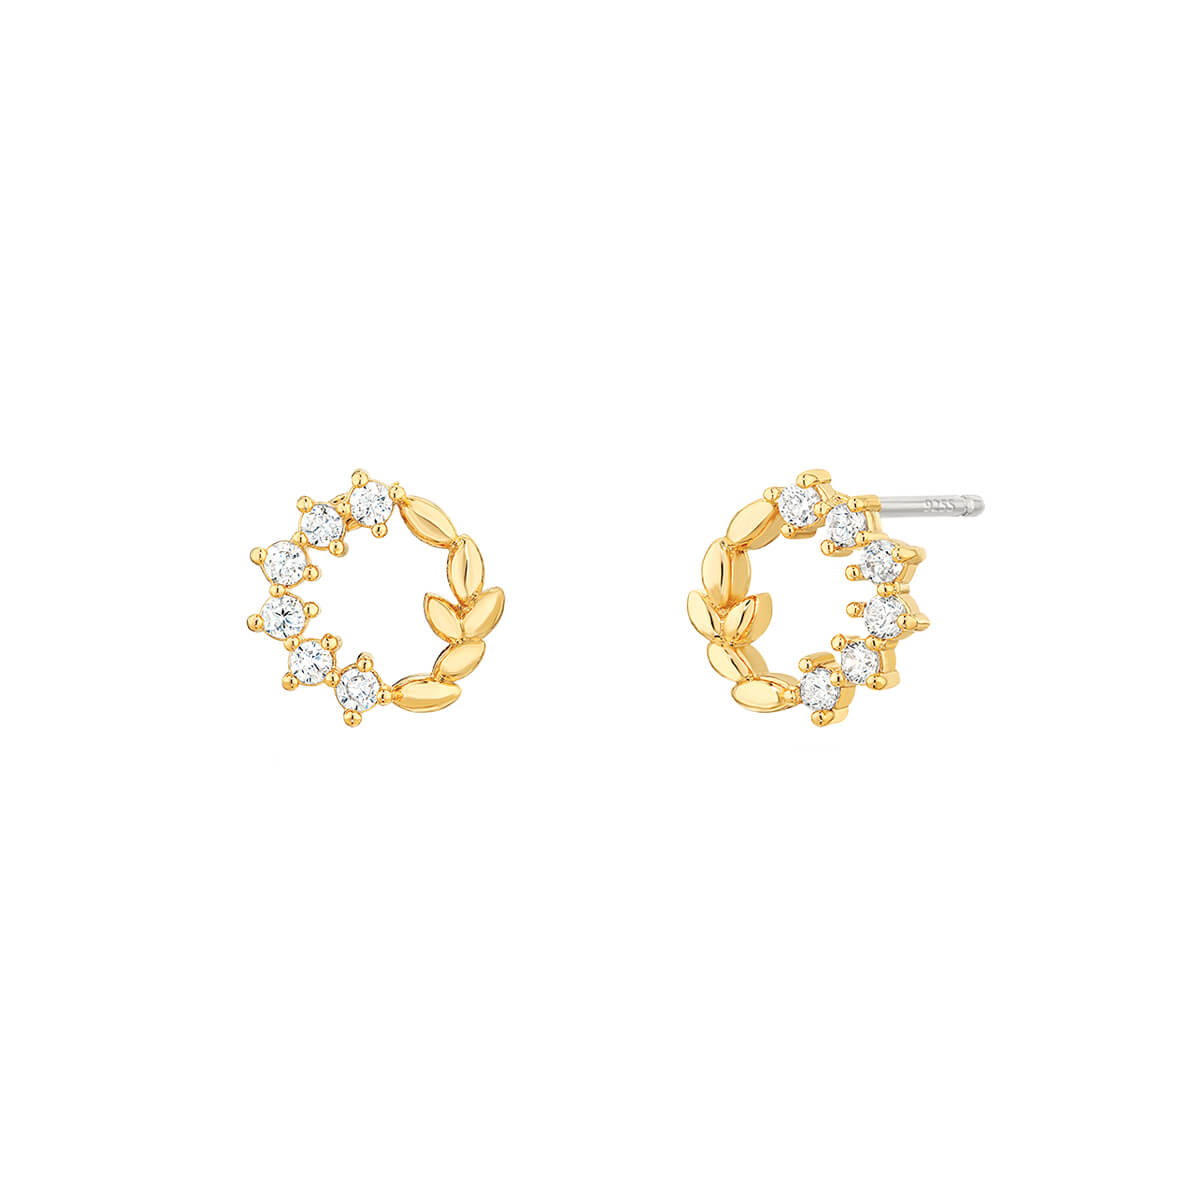 WITH BLING | Small Wreath Earrings